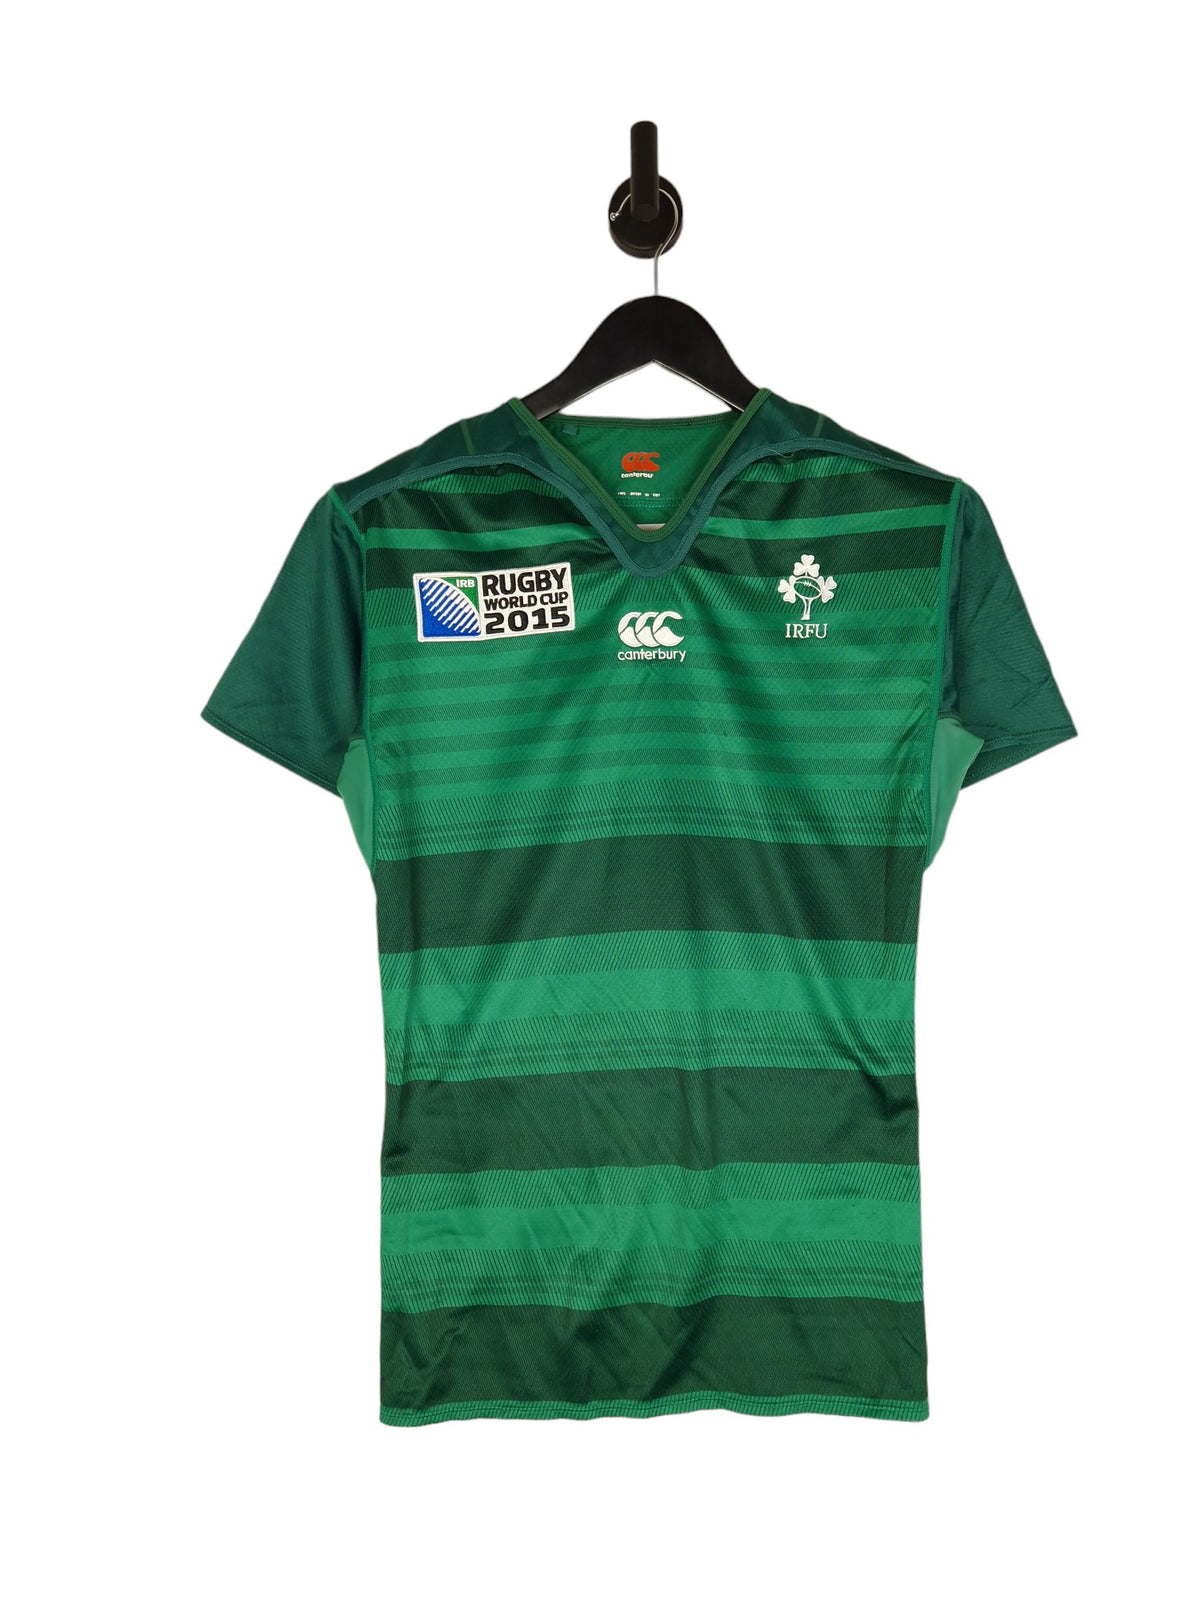 Canterbury Ireland 2015 /2016 World Cup Rugby Union Shirt - Size XS